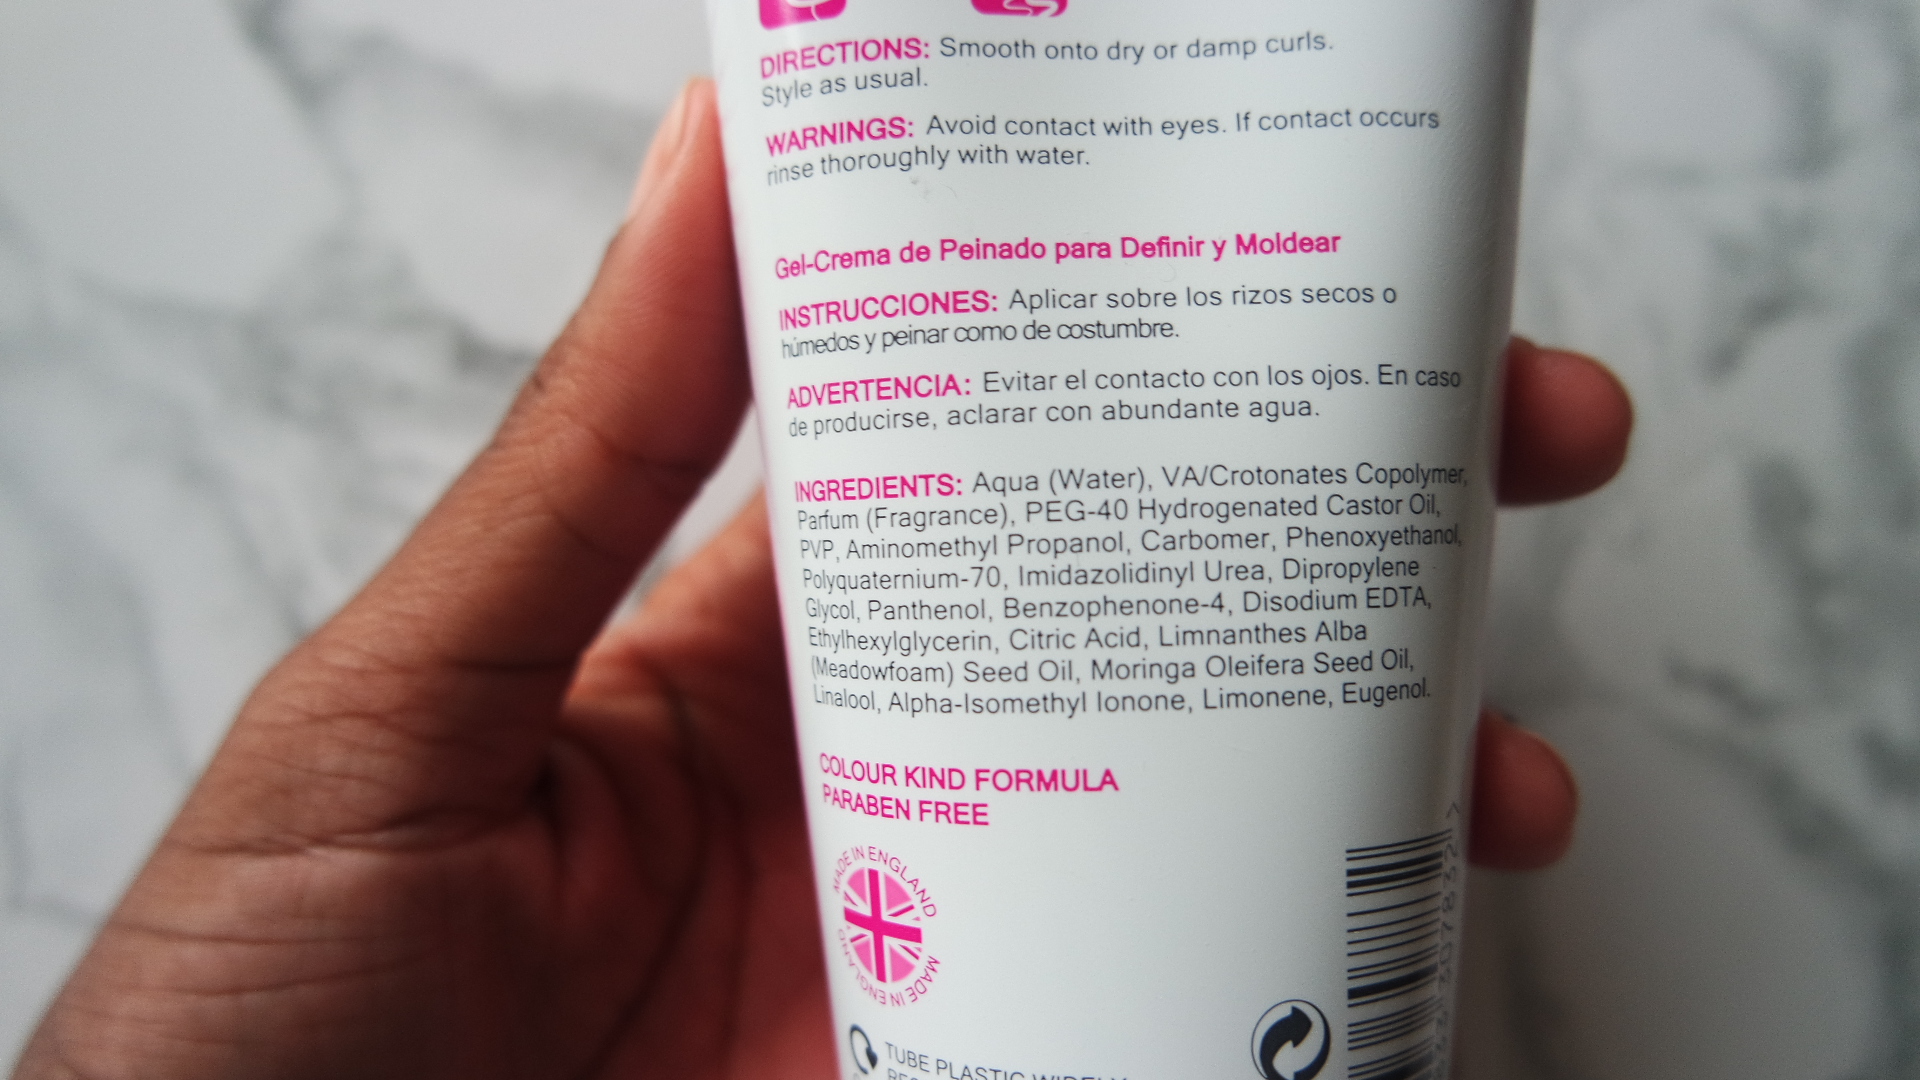 The Curl Company Styling Creme Gel